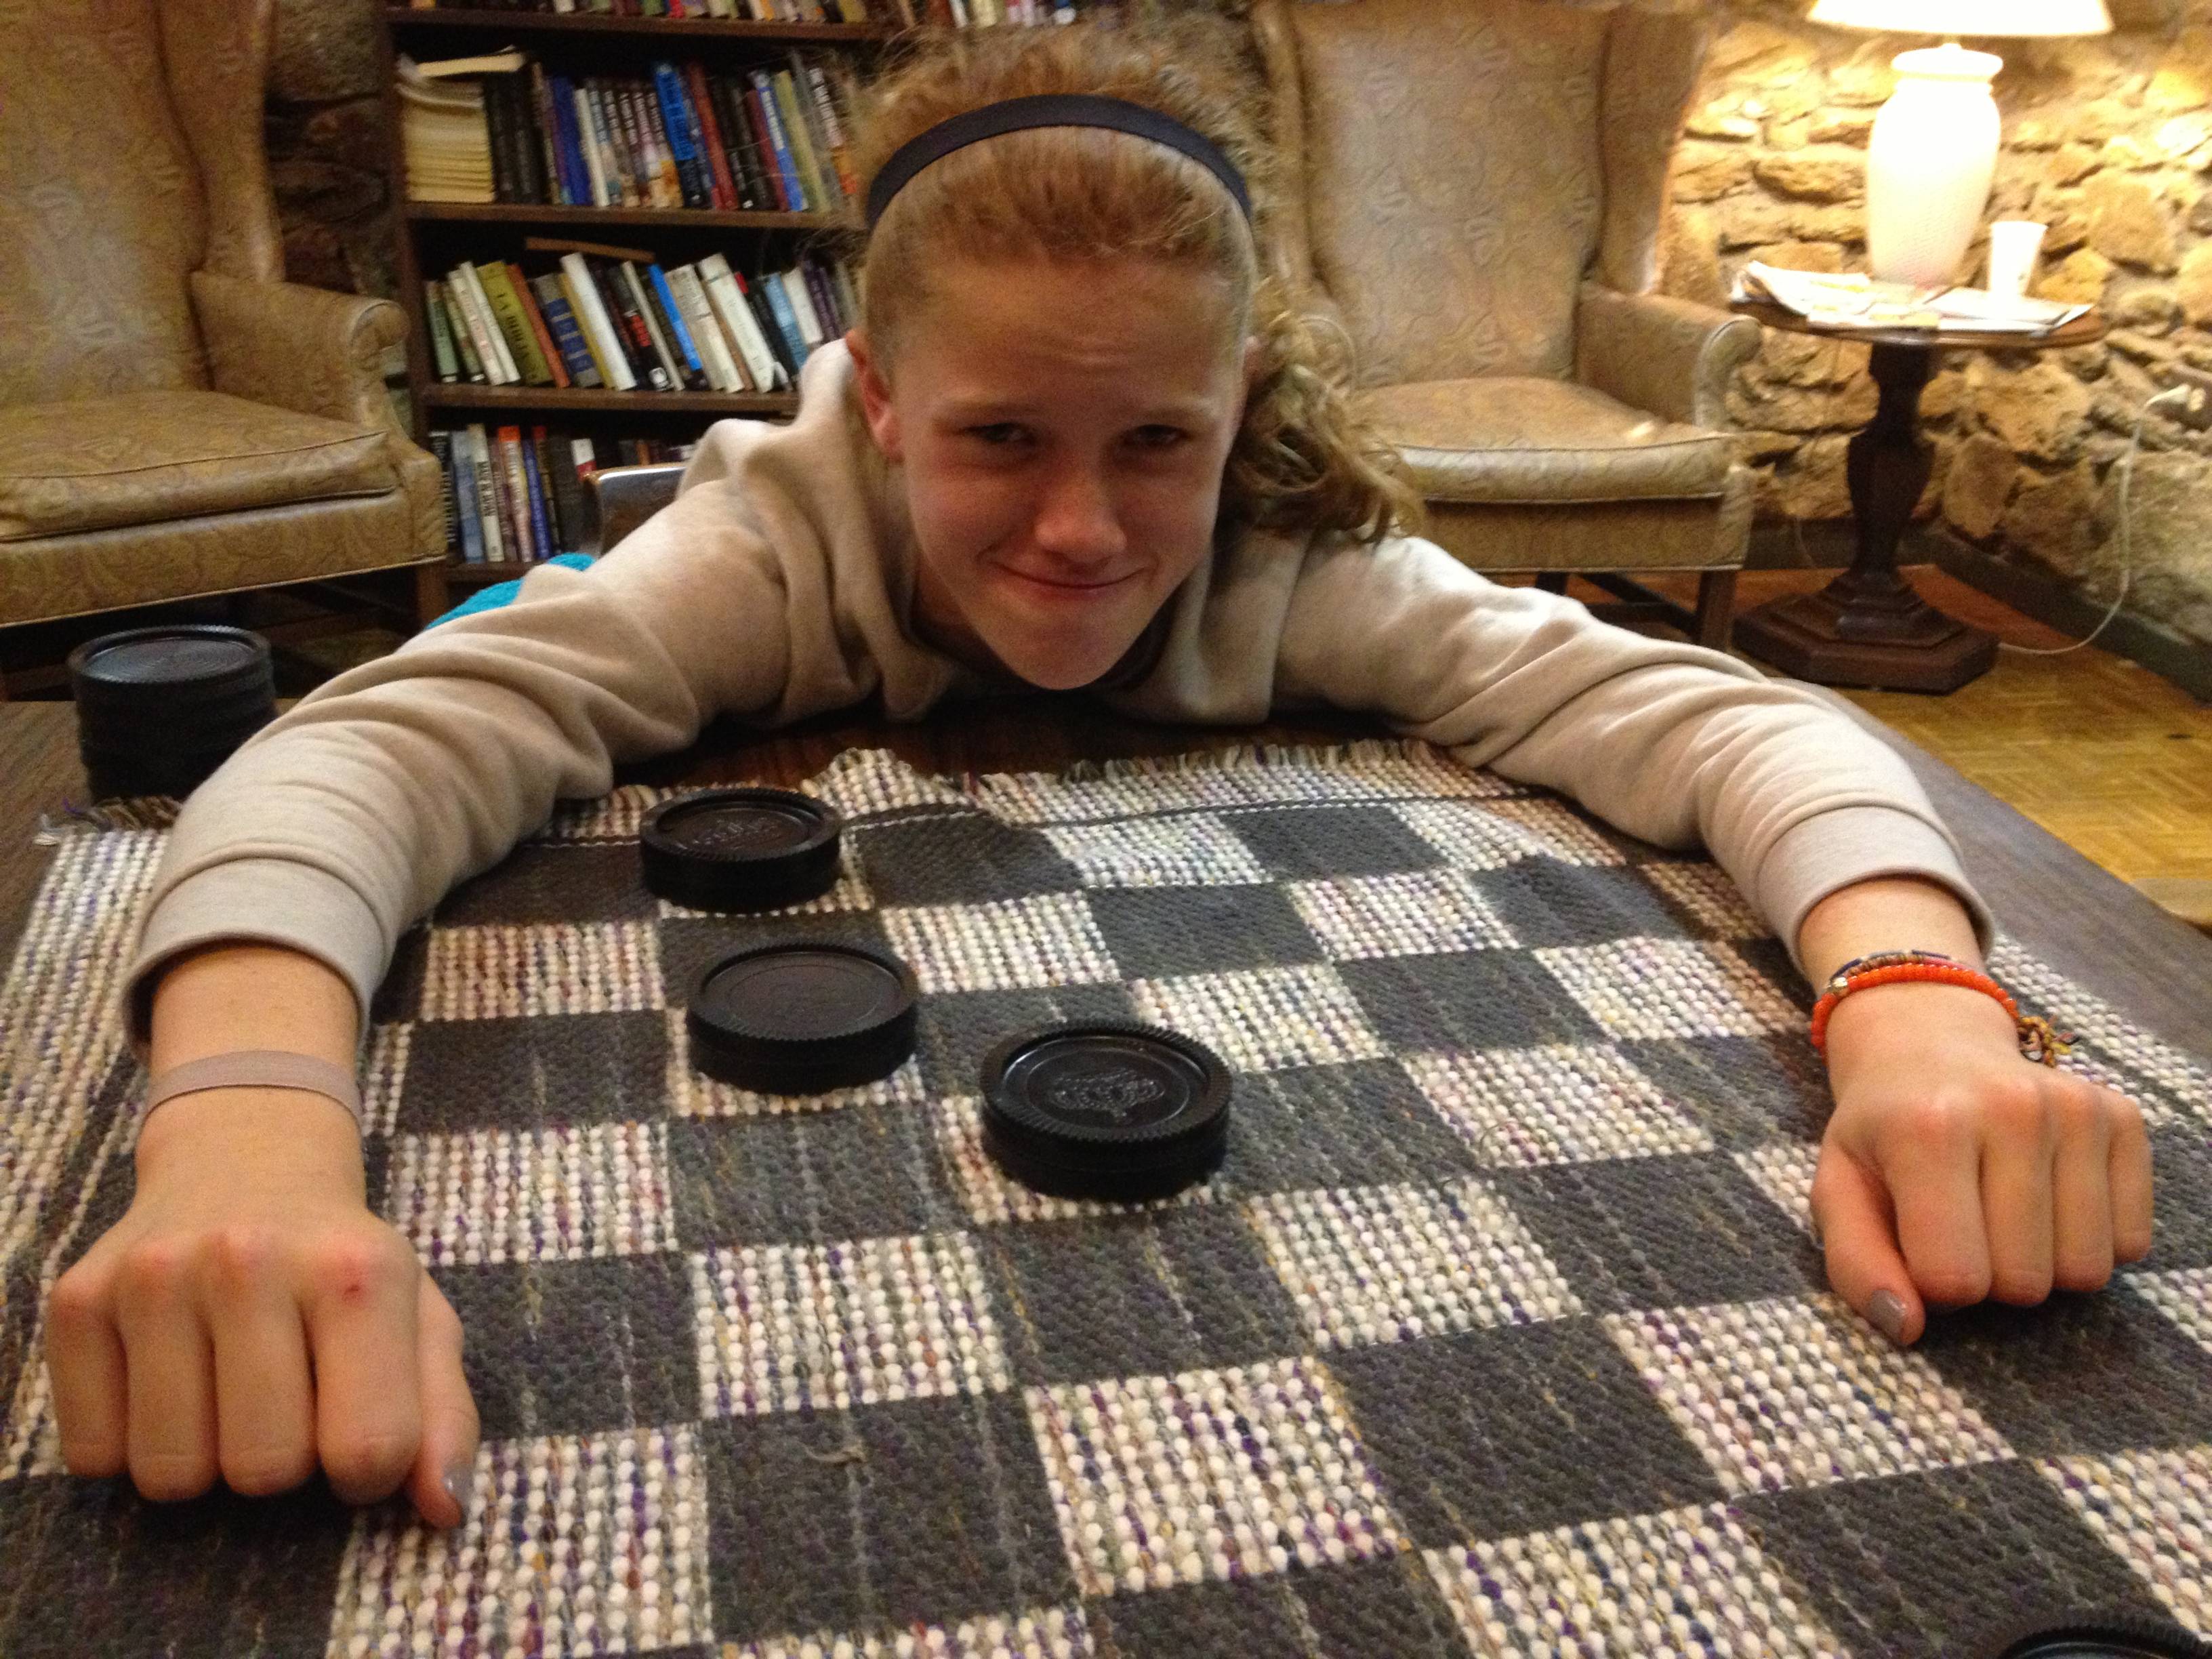 thanksgiving checkers loss 4 Every Thanksgiving His Cousin Challenges Him to Checkers... 8 Years of Defeat and Counting